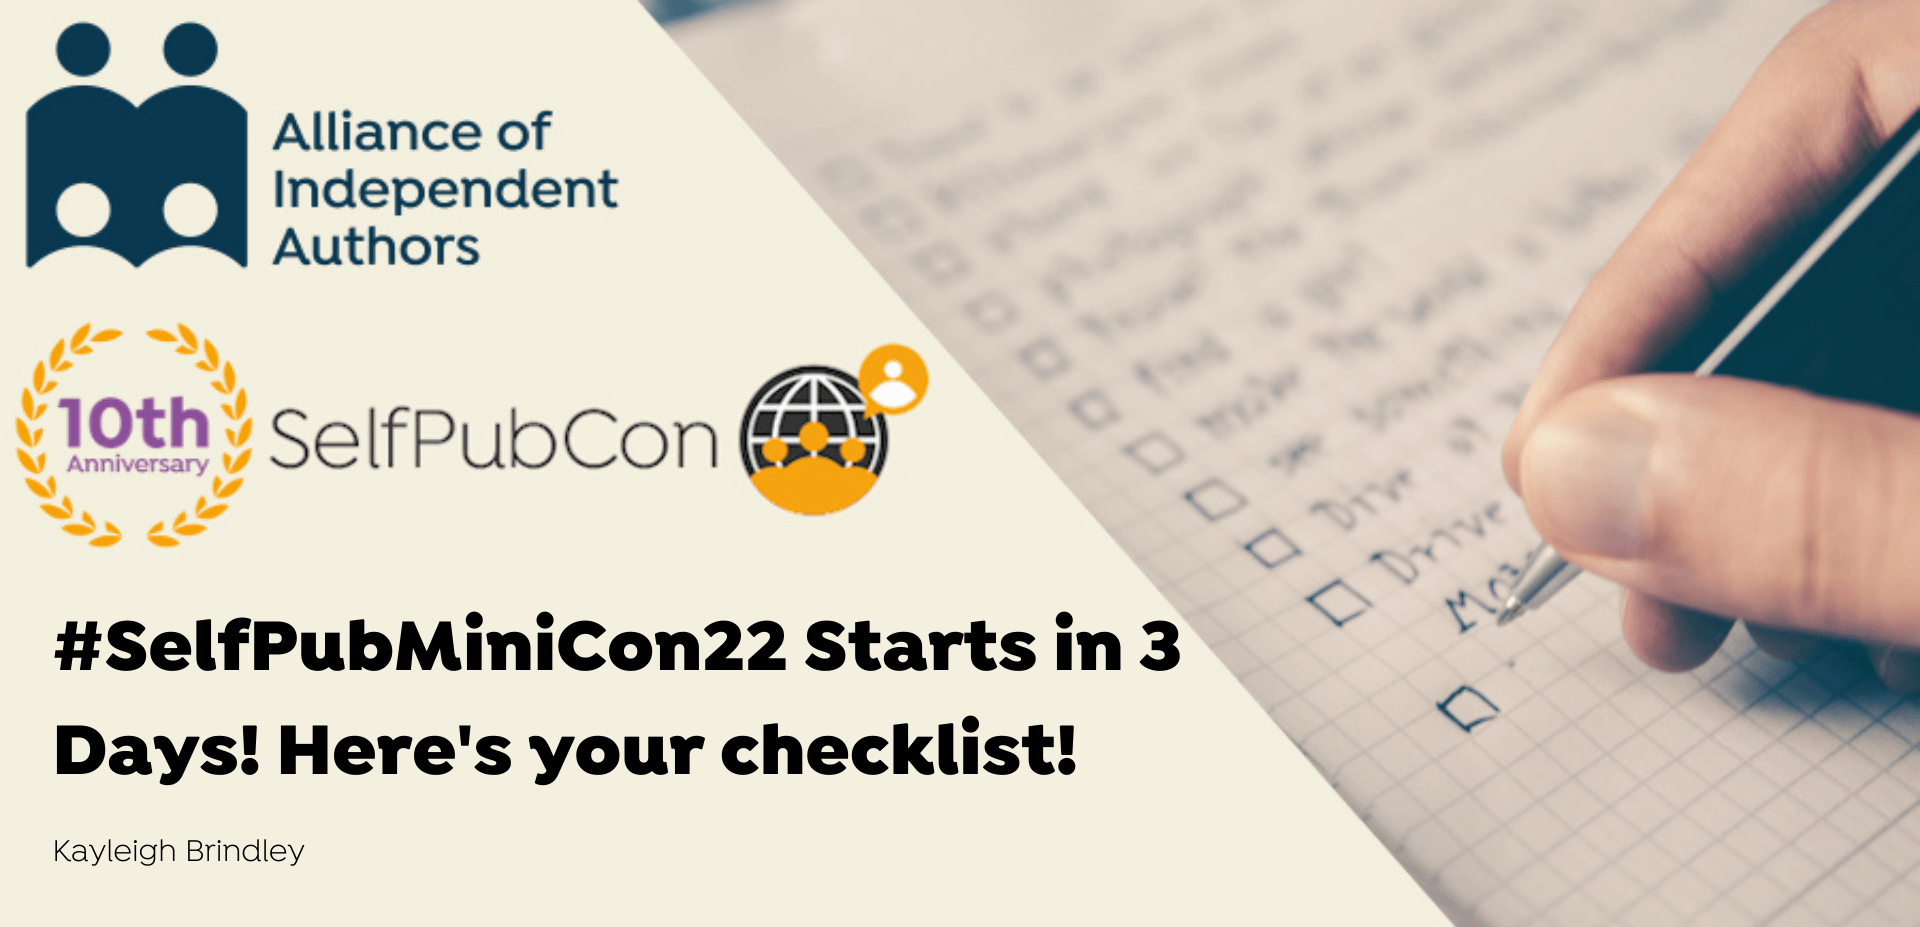 #SelfPubMiniCon22 Starts In 3 Days! Here’s Your Checklist!